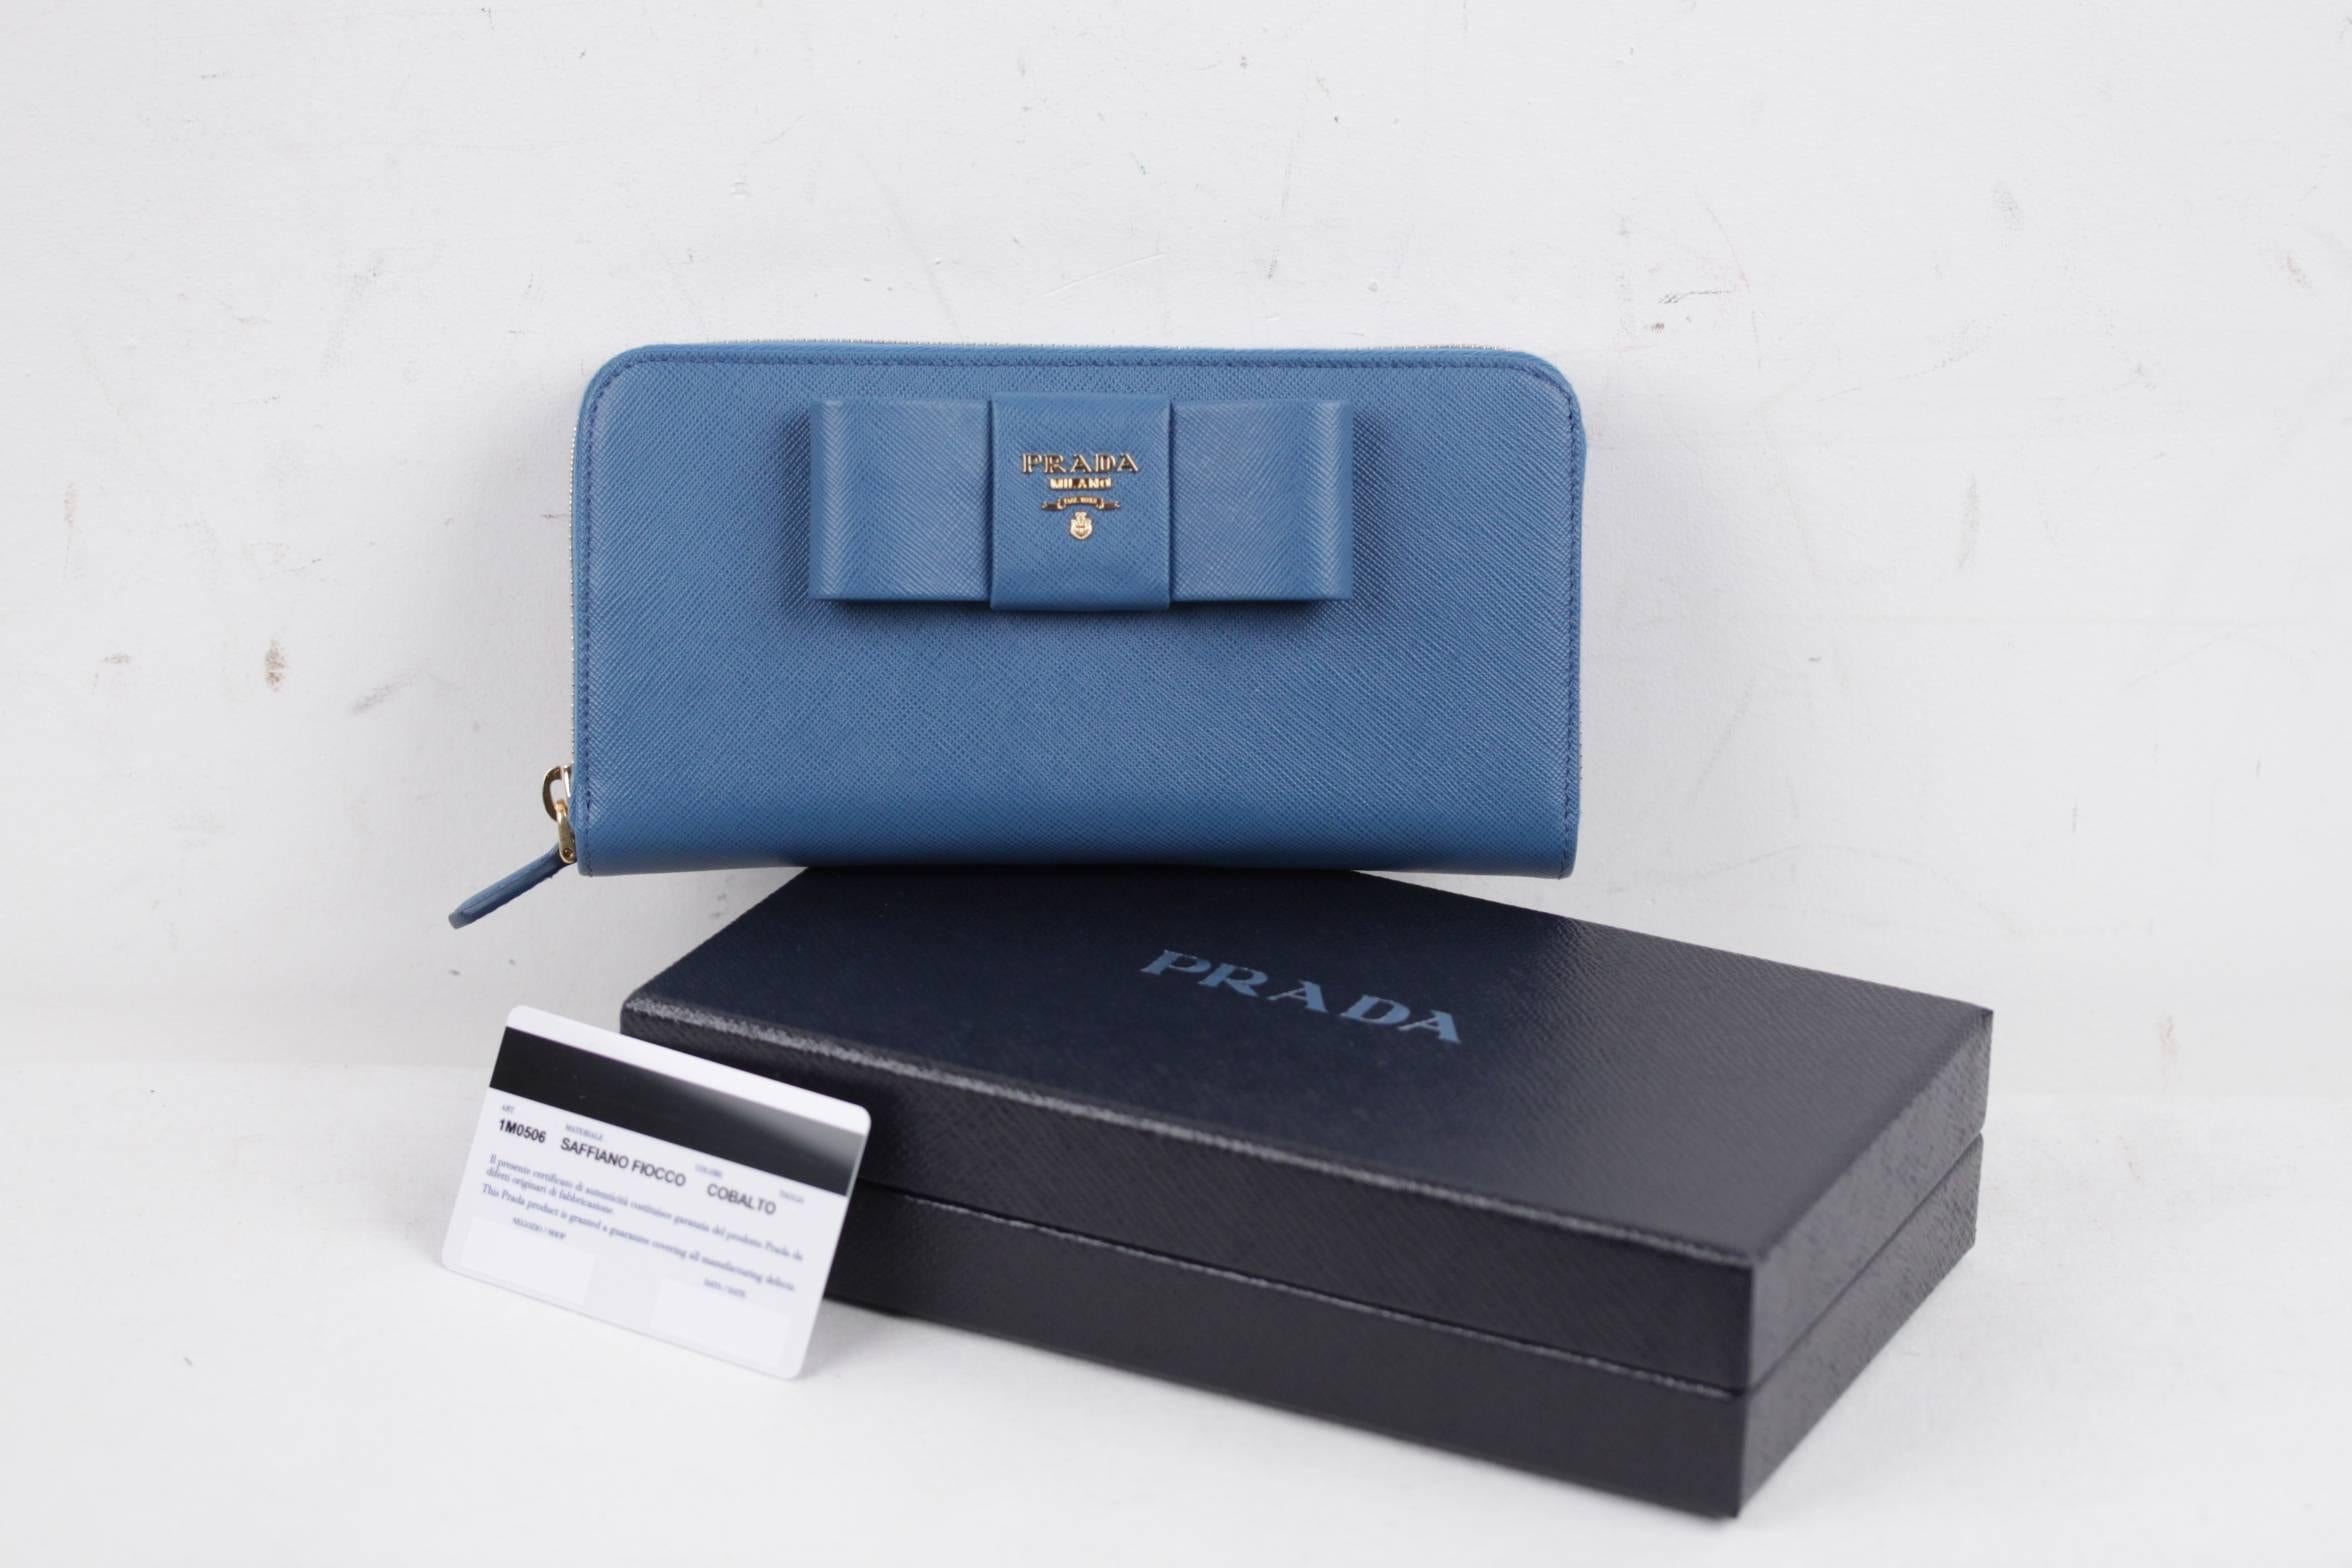  - Saffiano leather wallet with leather bow of the front
- Color. Light Blue (Official PRADA color is COBALTO)
- Art. 1M0506 - SAFFIANO FIOCCO
- Gold-plated hardware
- Metal lettering logo
- Zipper closure
- 12 credit card slots
- 6 inside